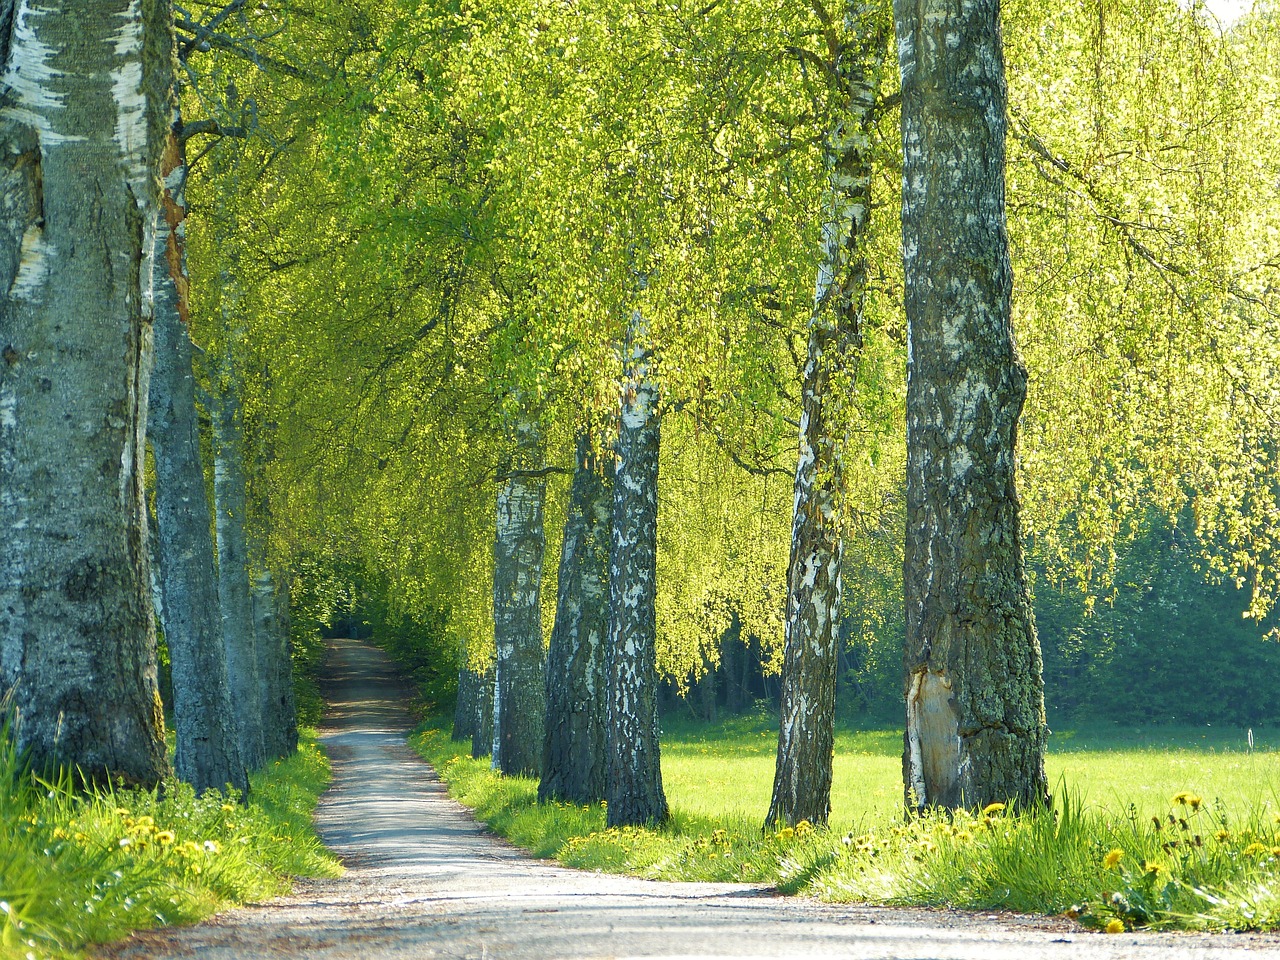 a bunch of trees that are next to a road, a picture, by Istvan Banyai, shutterstock, betula pendula, nice spring afternoon lighting, swedish countryside, green alley